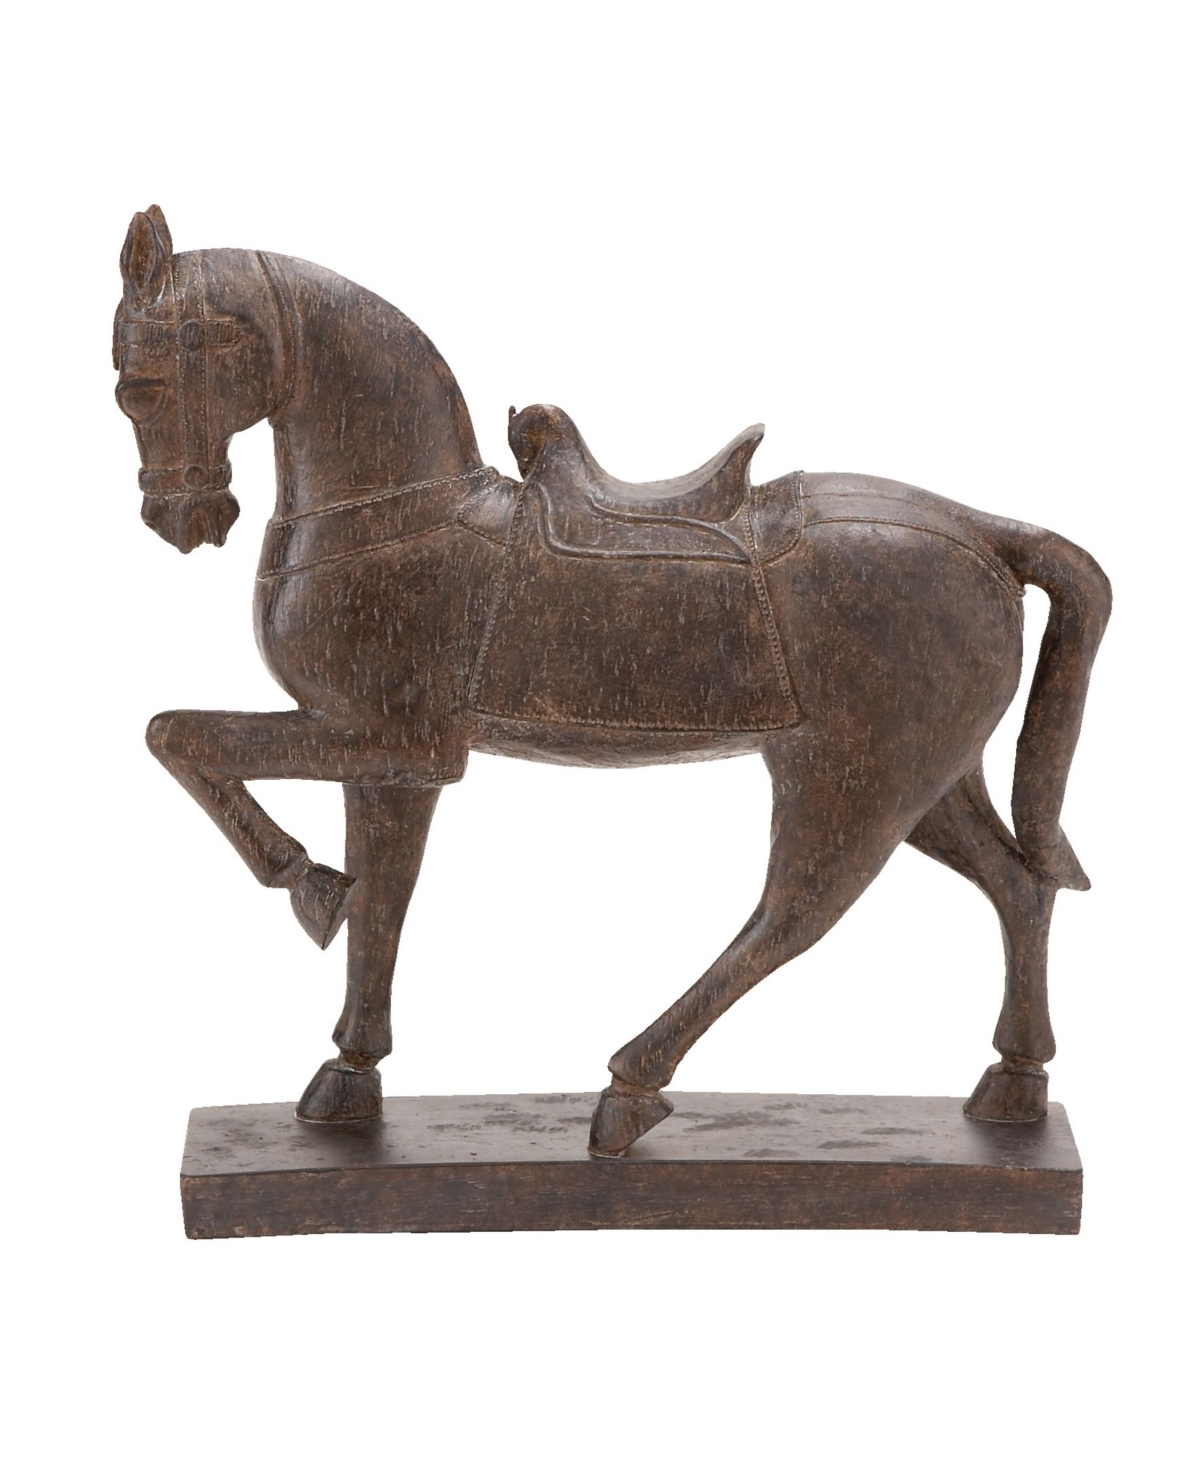 Rosemary Lane Traditional Horse Sculpture, 15" X 14" In Brown